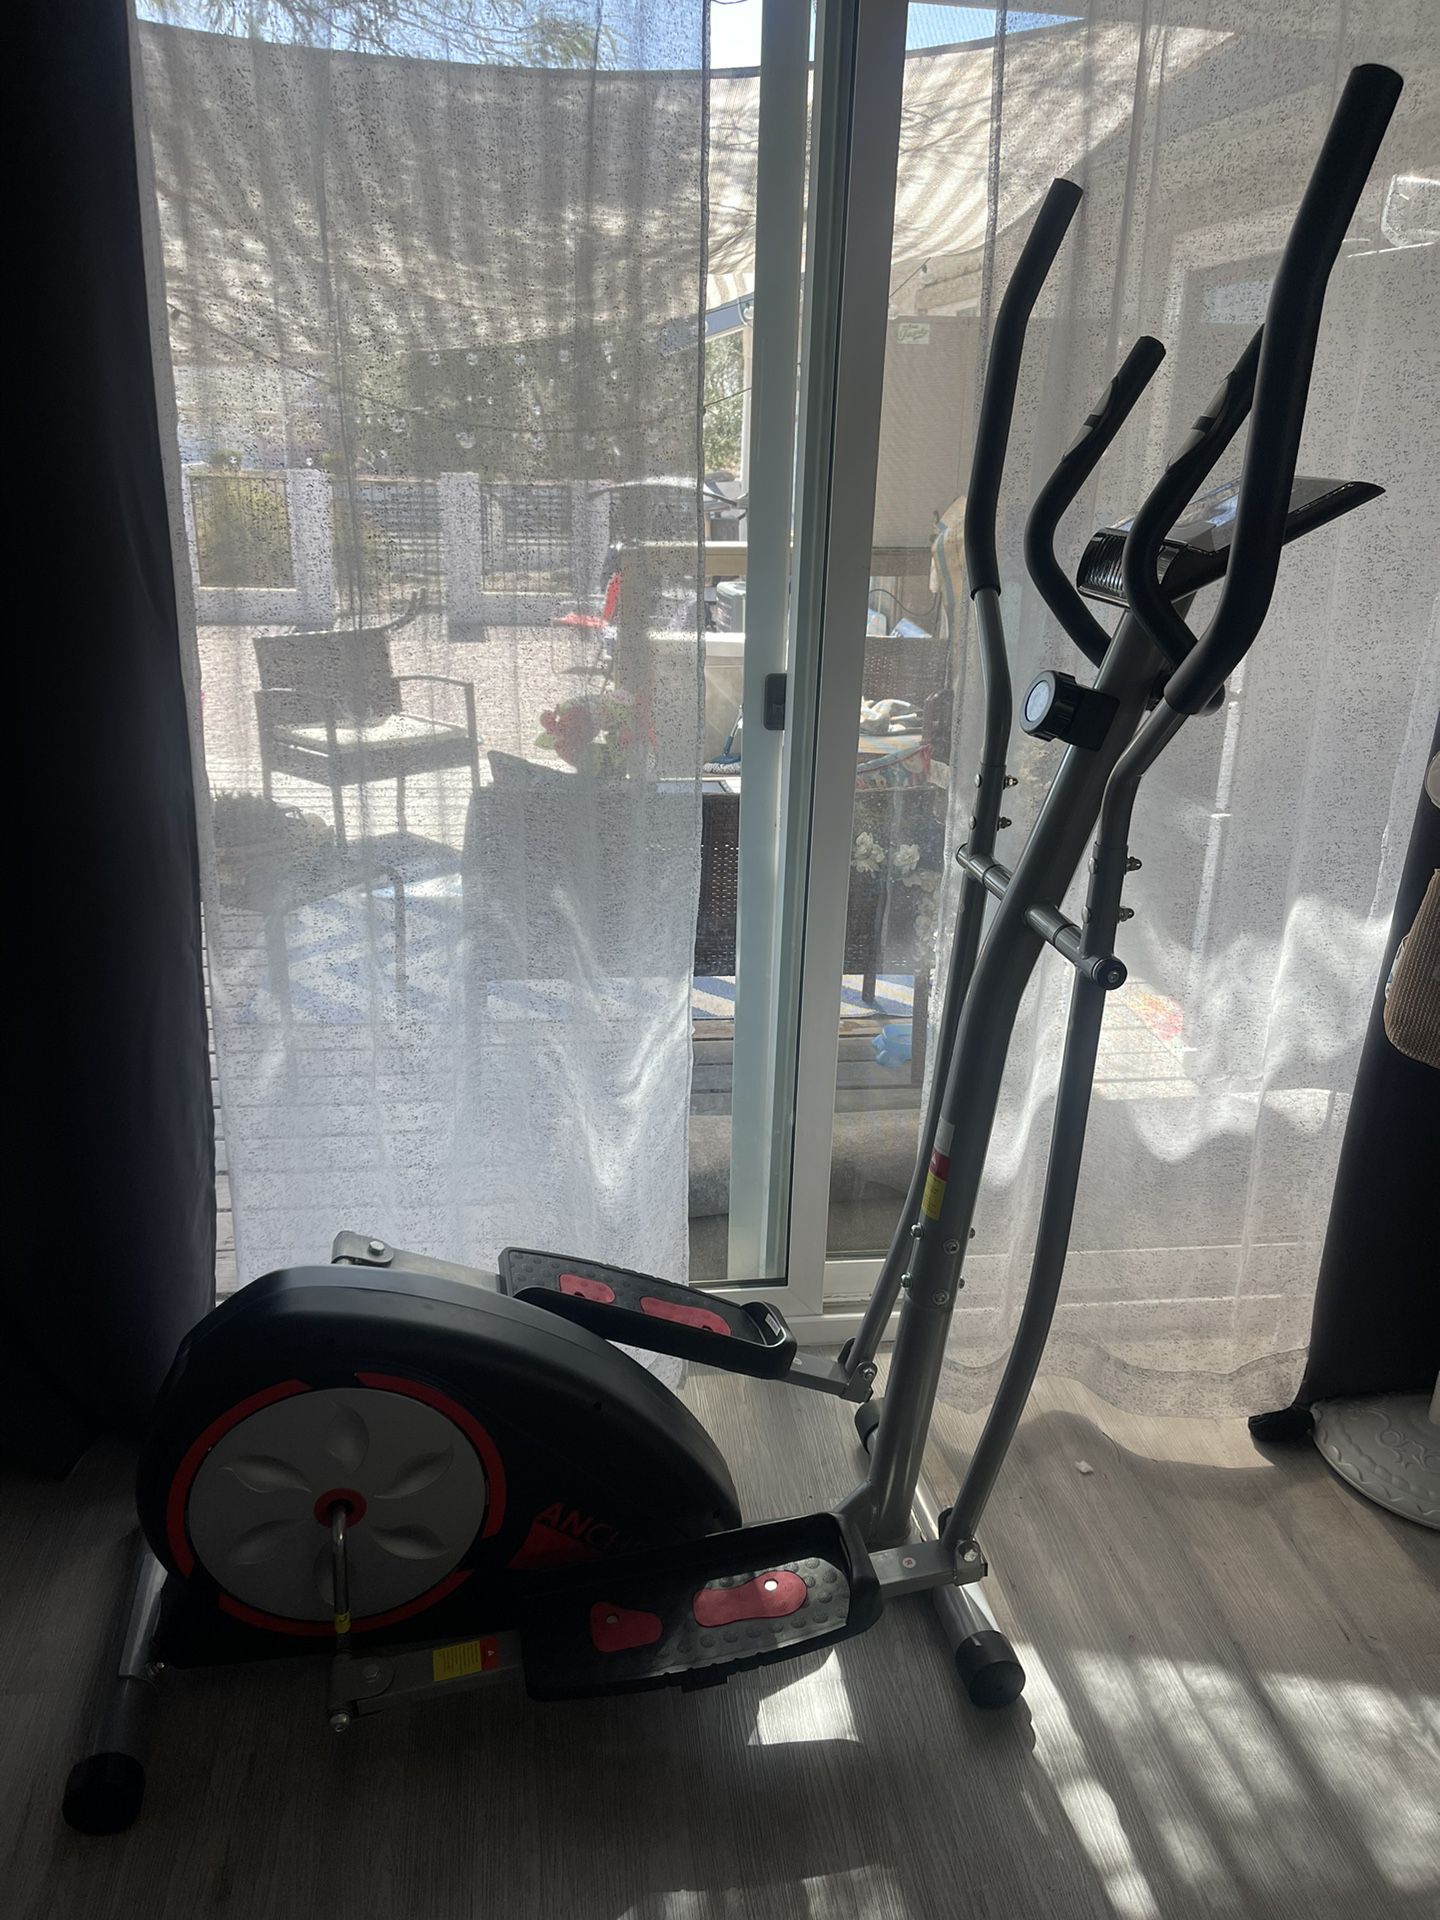 Brand New compact elliptical exercise machine.